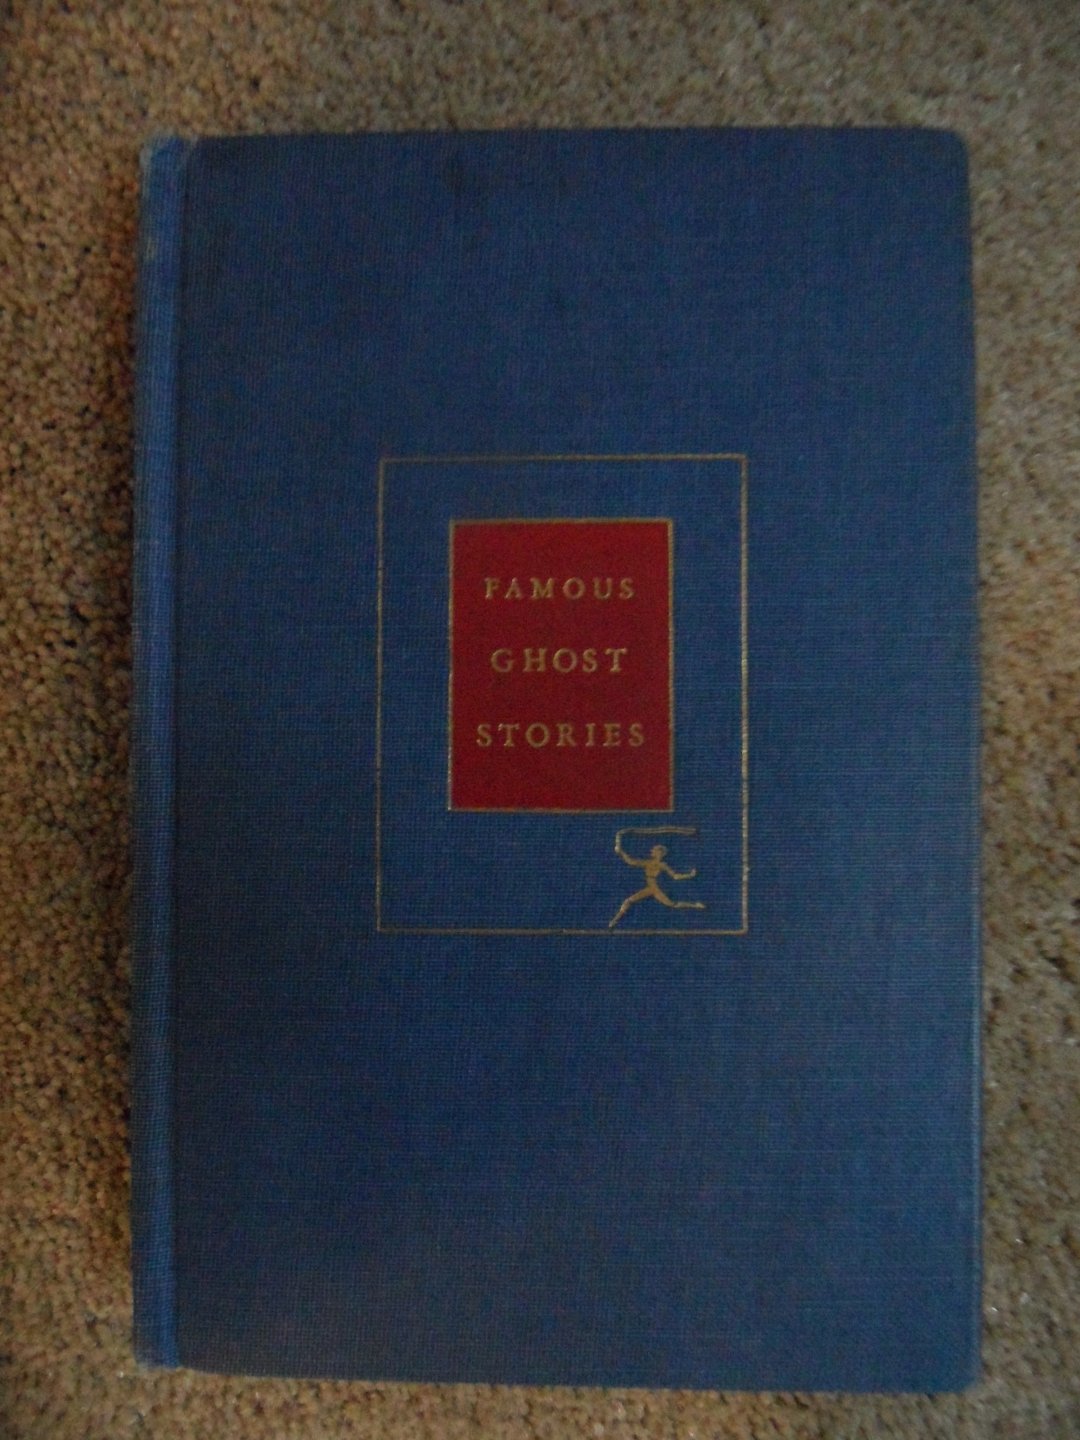 Cerf, A. Bennett - Famous Ghost stories